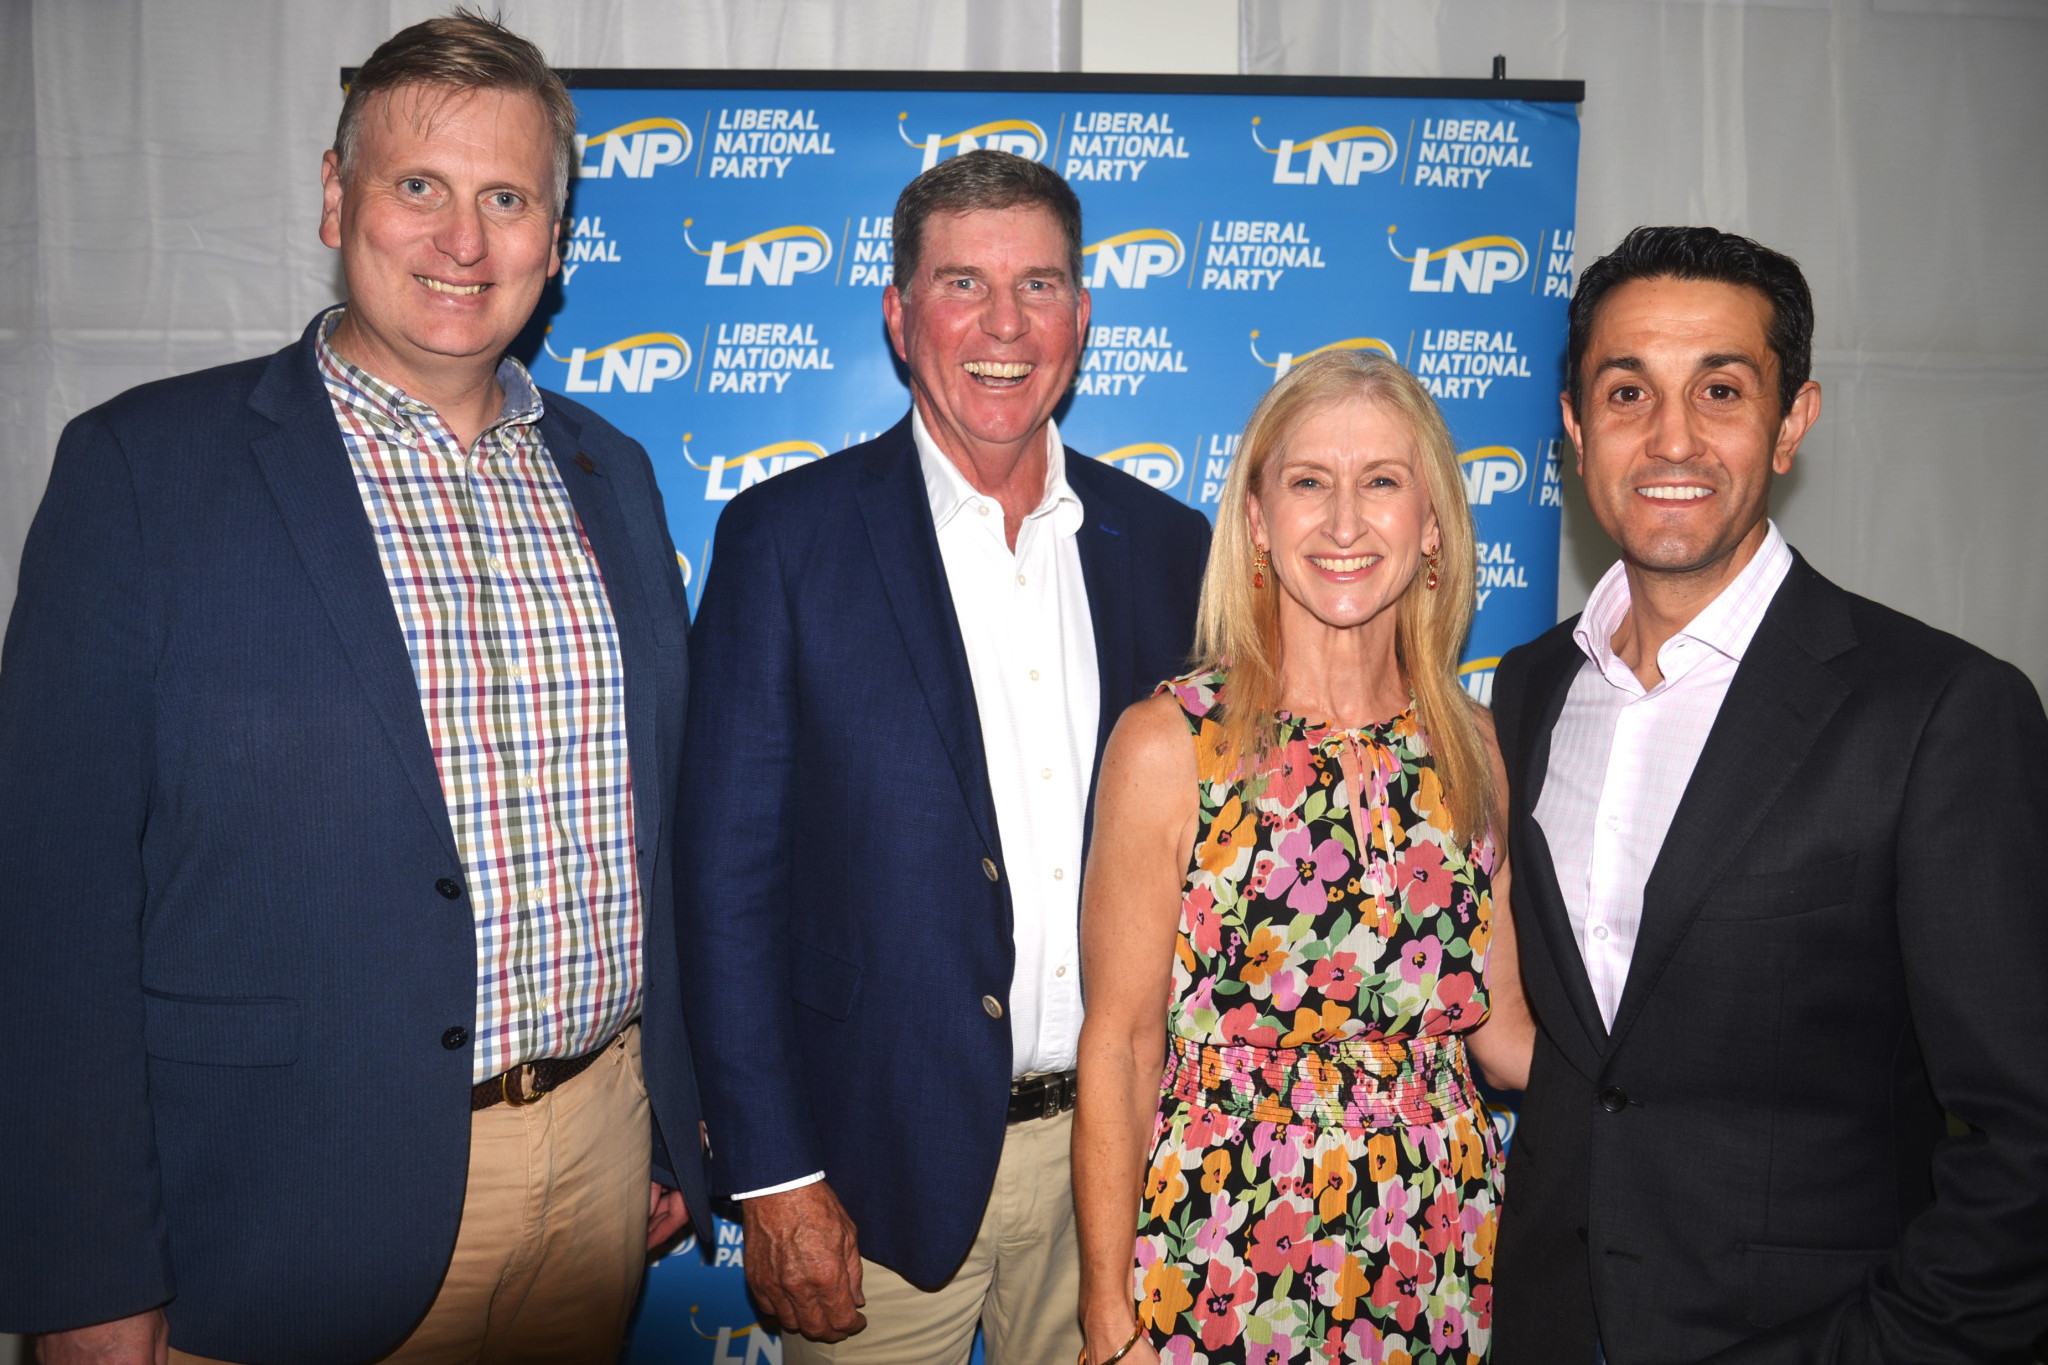 Member for Southern Downs, James Lister, Brent Finlay, Jane Paterson and LNP and opposition leader David Crisafulli (right) at an LNP dinner held in Warwick.